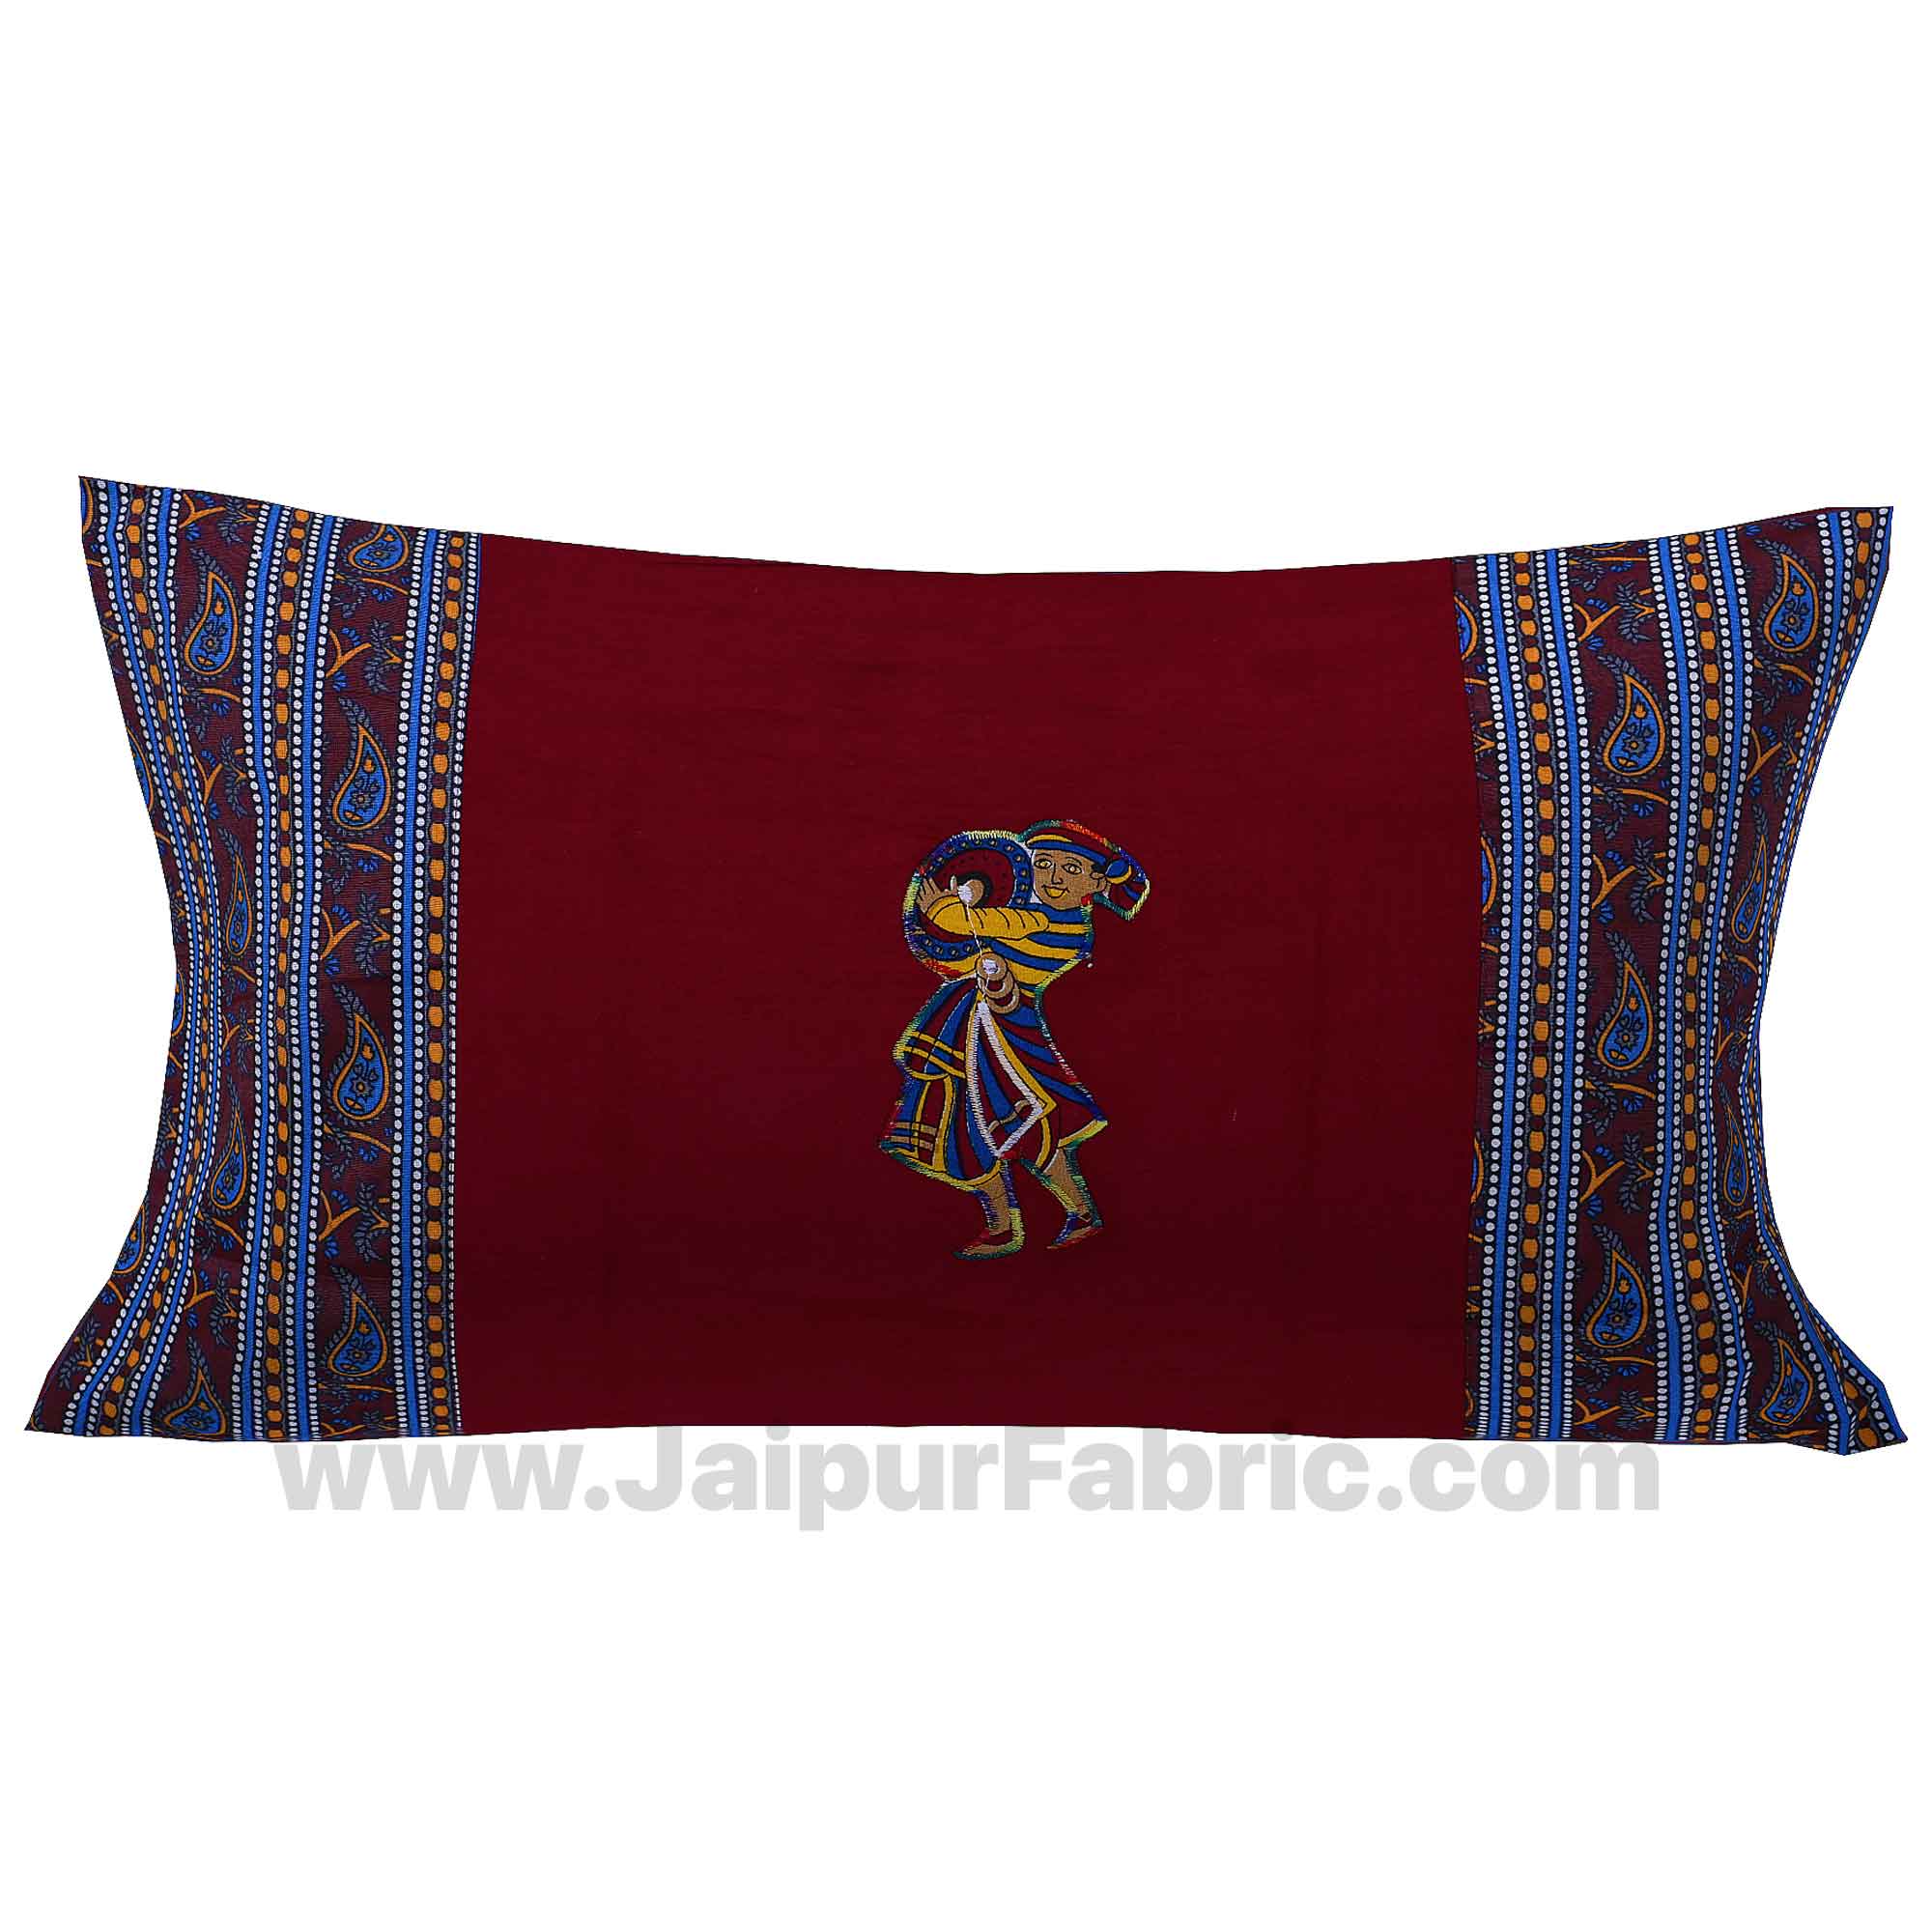 Applique Maroon Chang Dance Jaipuri  Hand Made Embroidery Patch Work Single Bedsheet